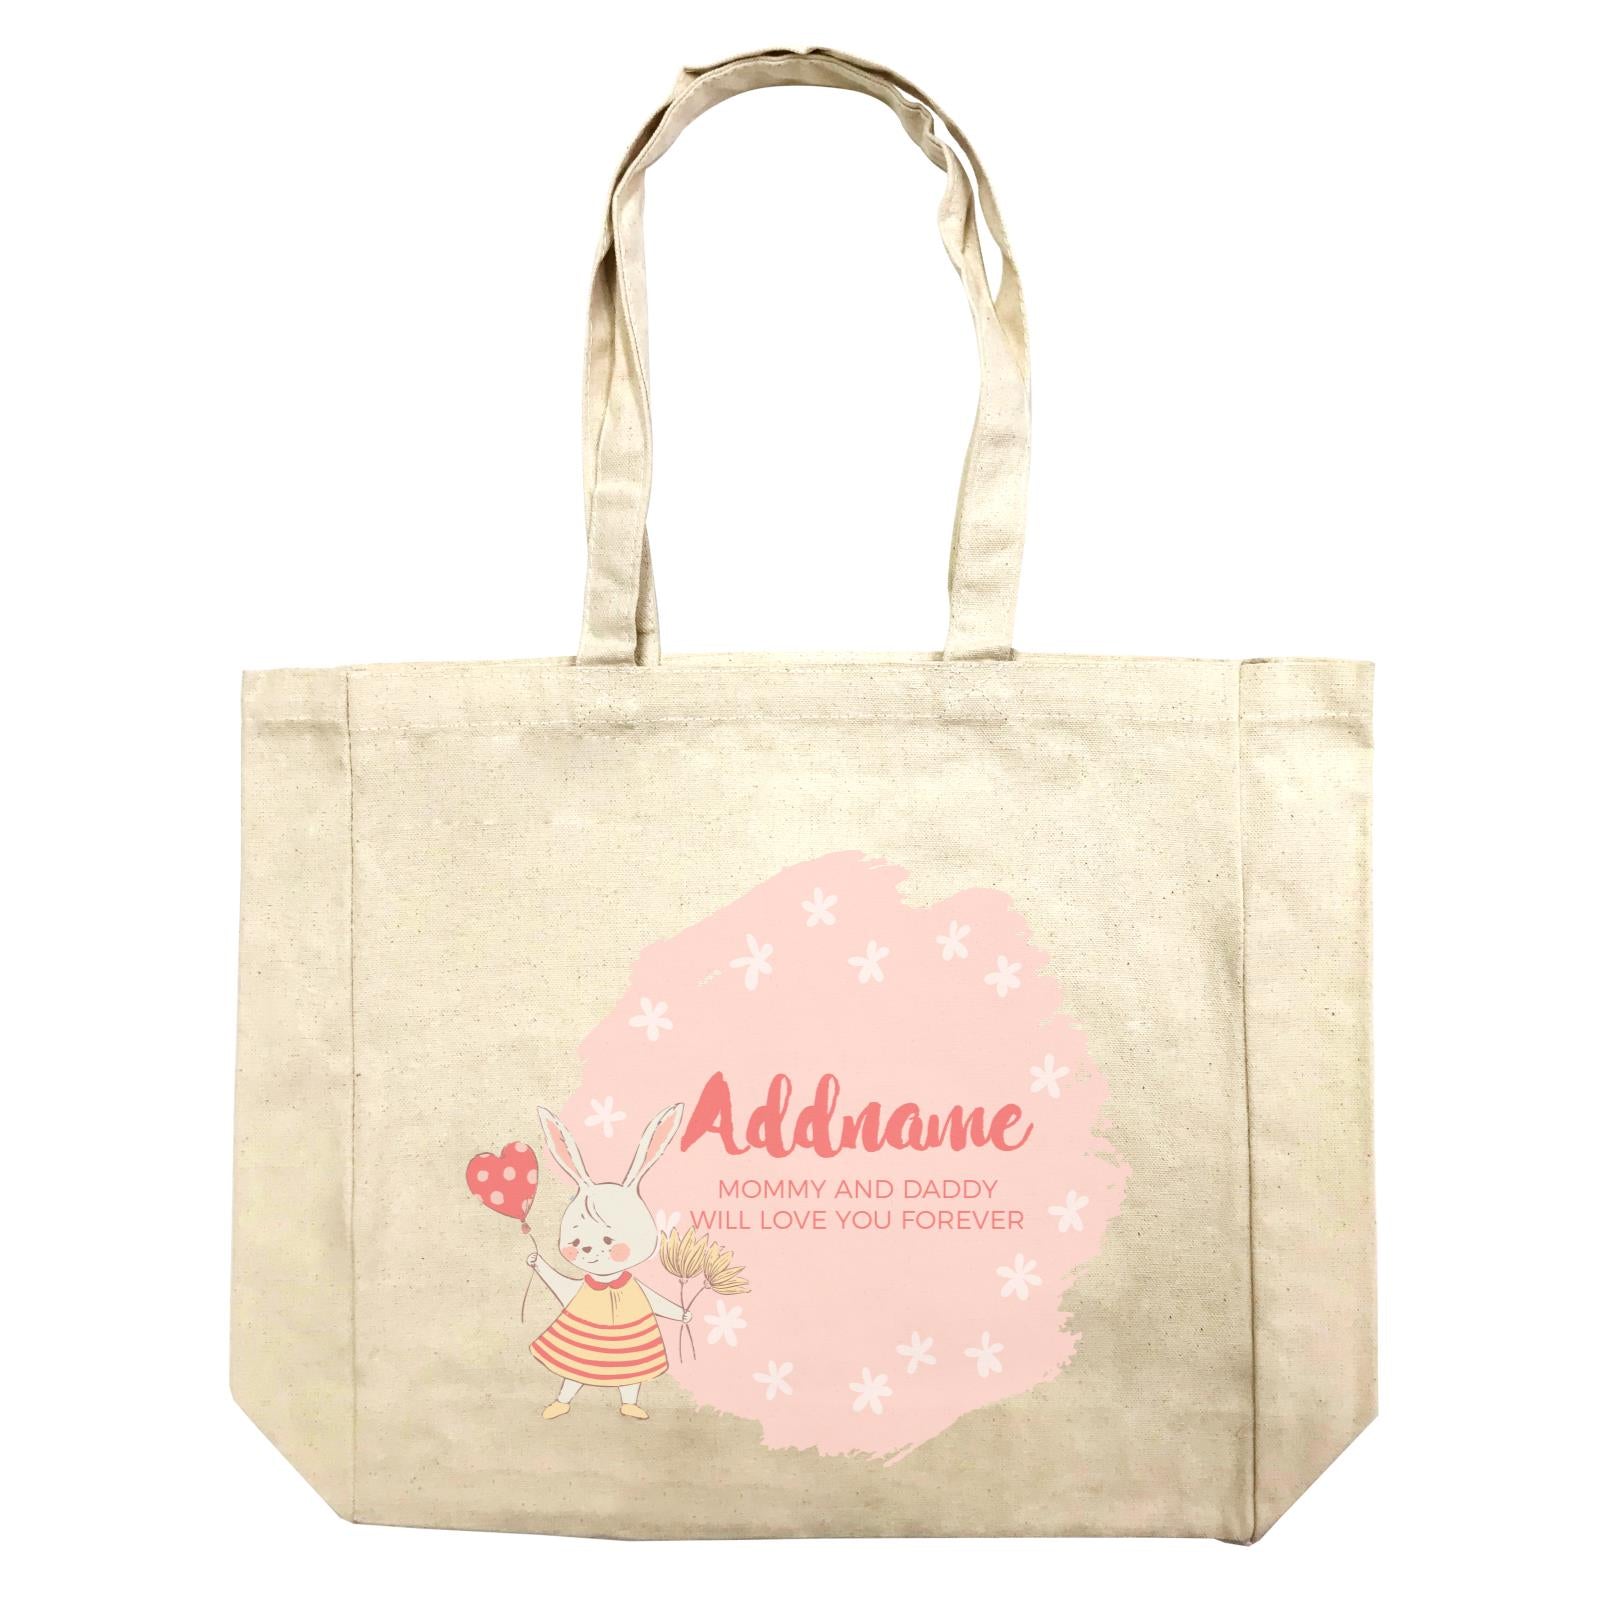 Cute Girl Rabbit with Heart Balloon Personalizable with Name and Text Shopping Bag